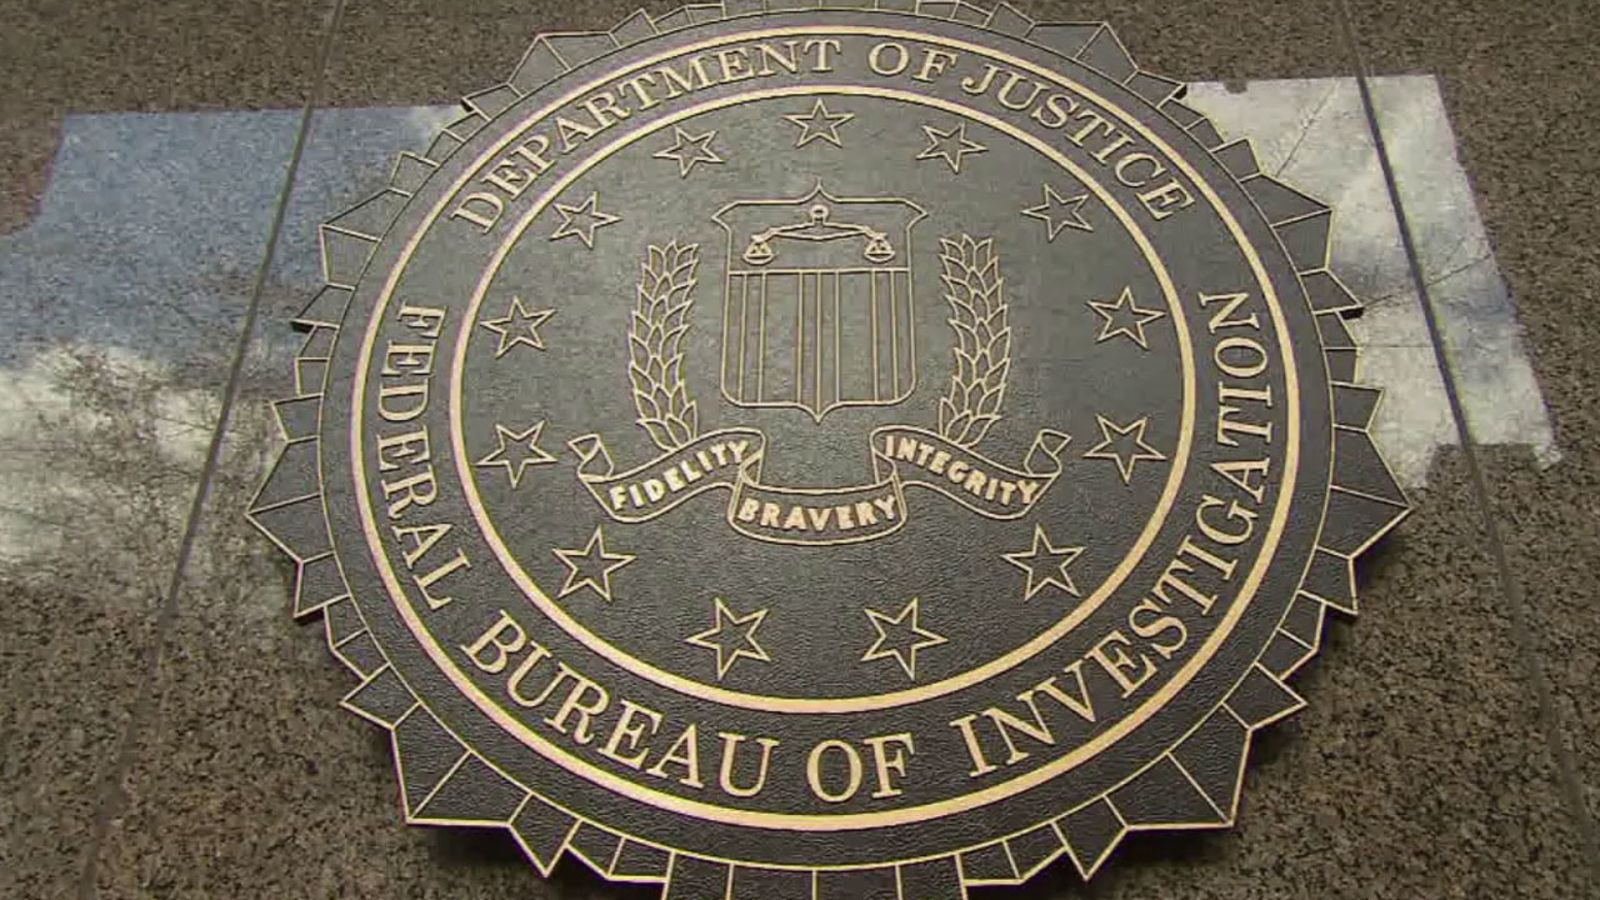 FBI special agent fired amid criminal investigation Los Angeles